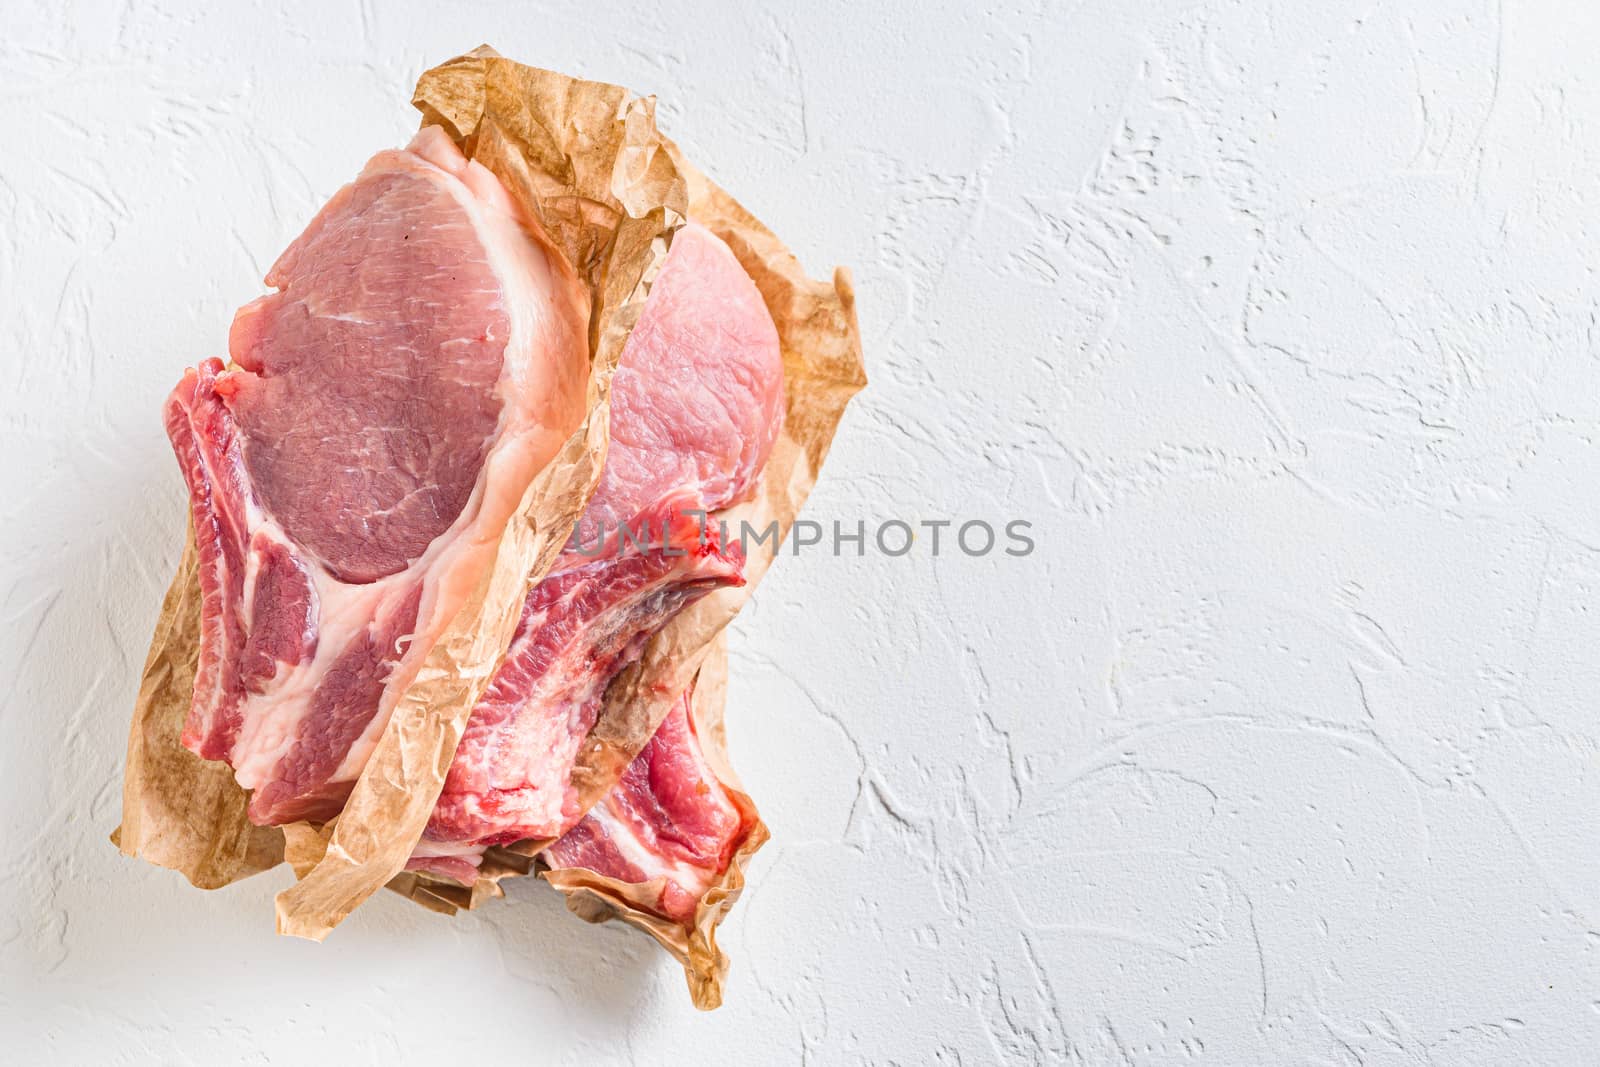 Raw organic bio Pork Belly grill. from above view on white stone background horizontal. Copyspace. by Ilianesolenyi